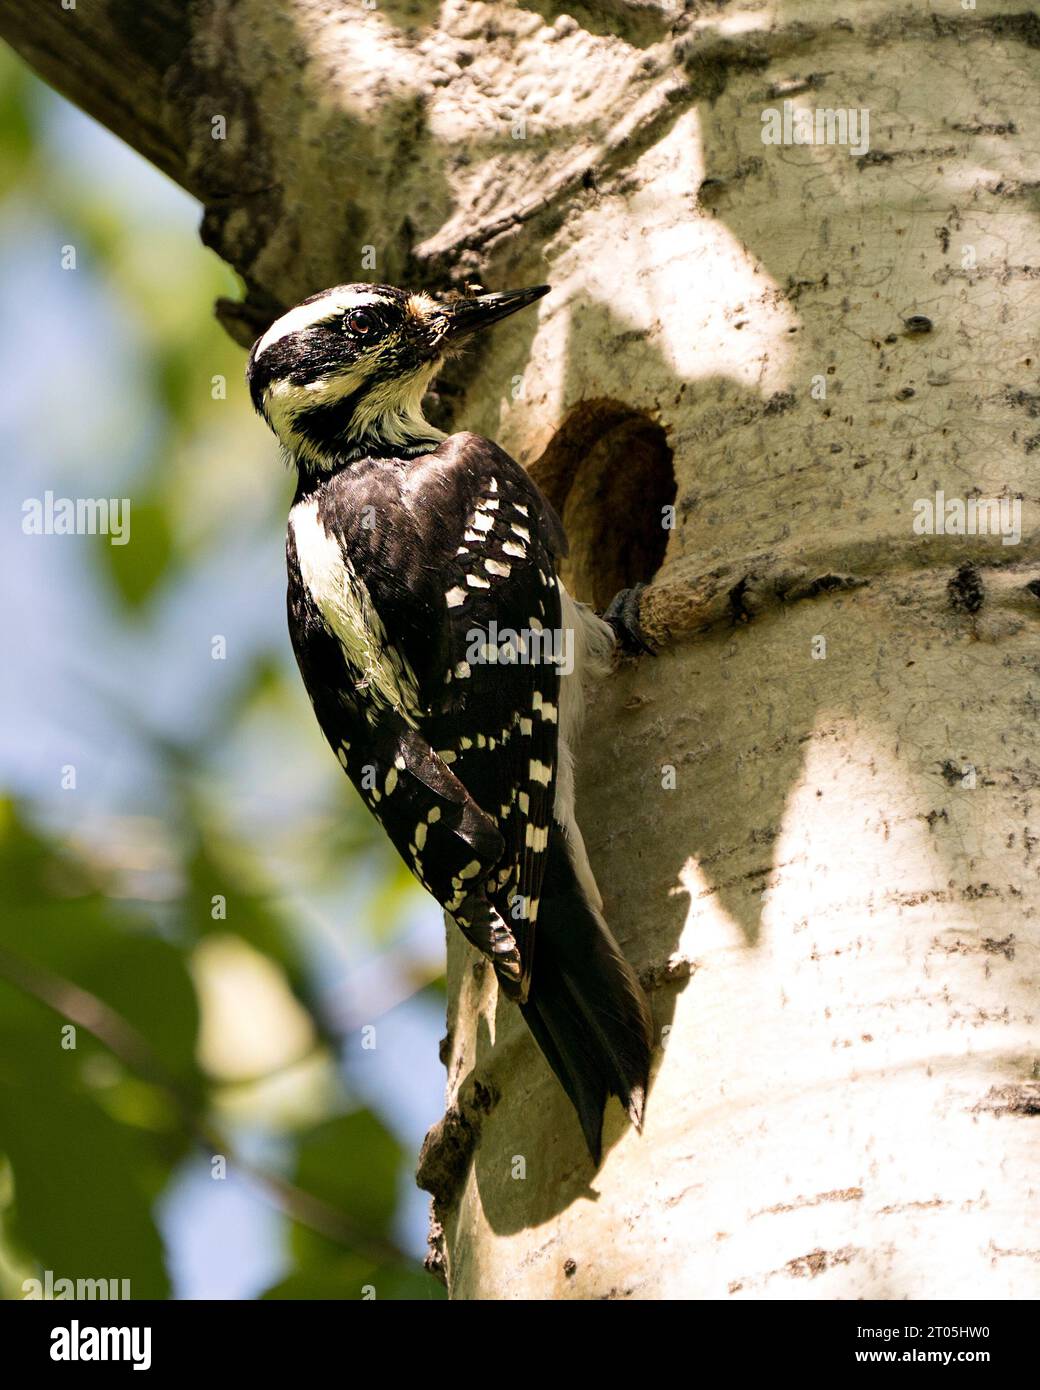 Woodpecker perched by its bird nest house inside tree trunk in its environment and habitat surrounding. Image. Picture. Portrait. Photo. Stock Photo